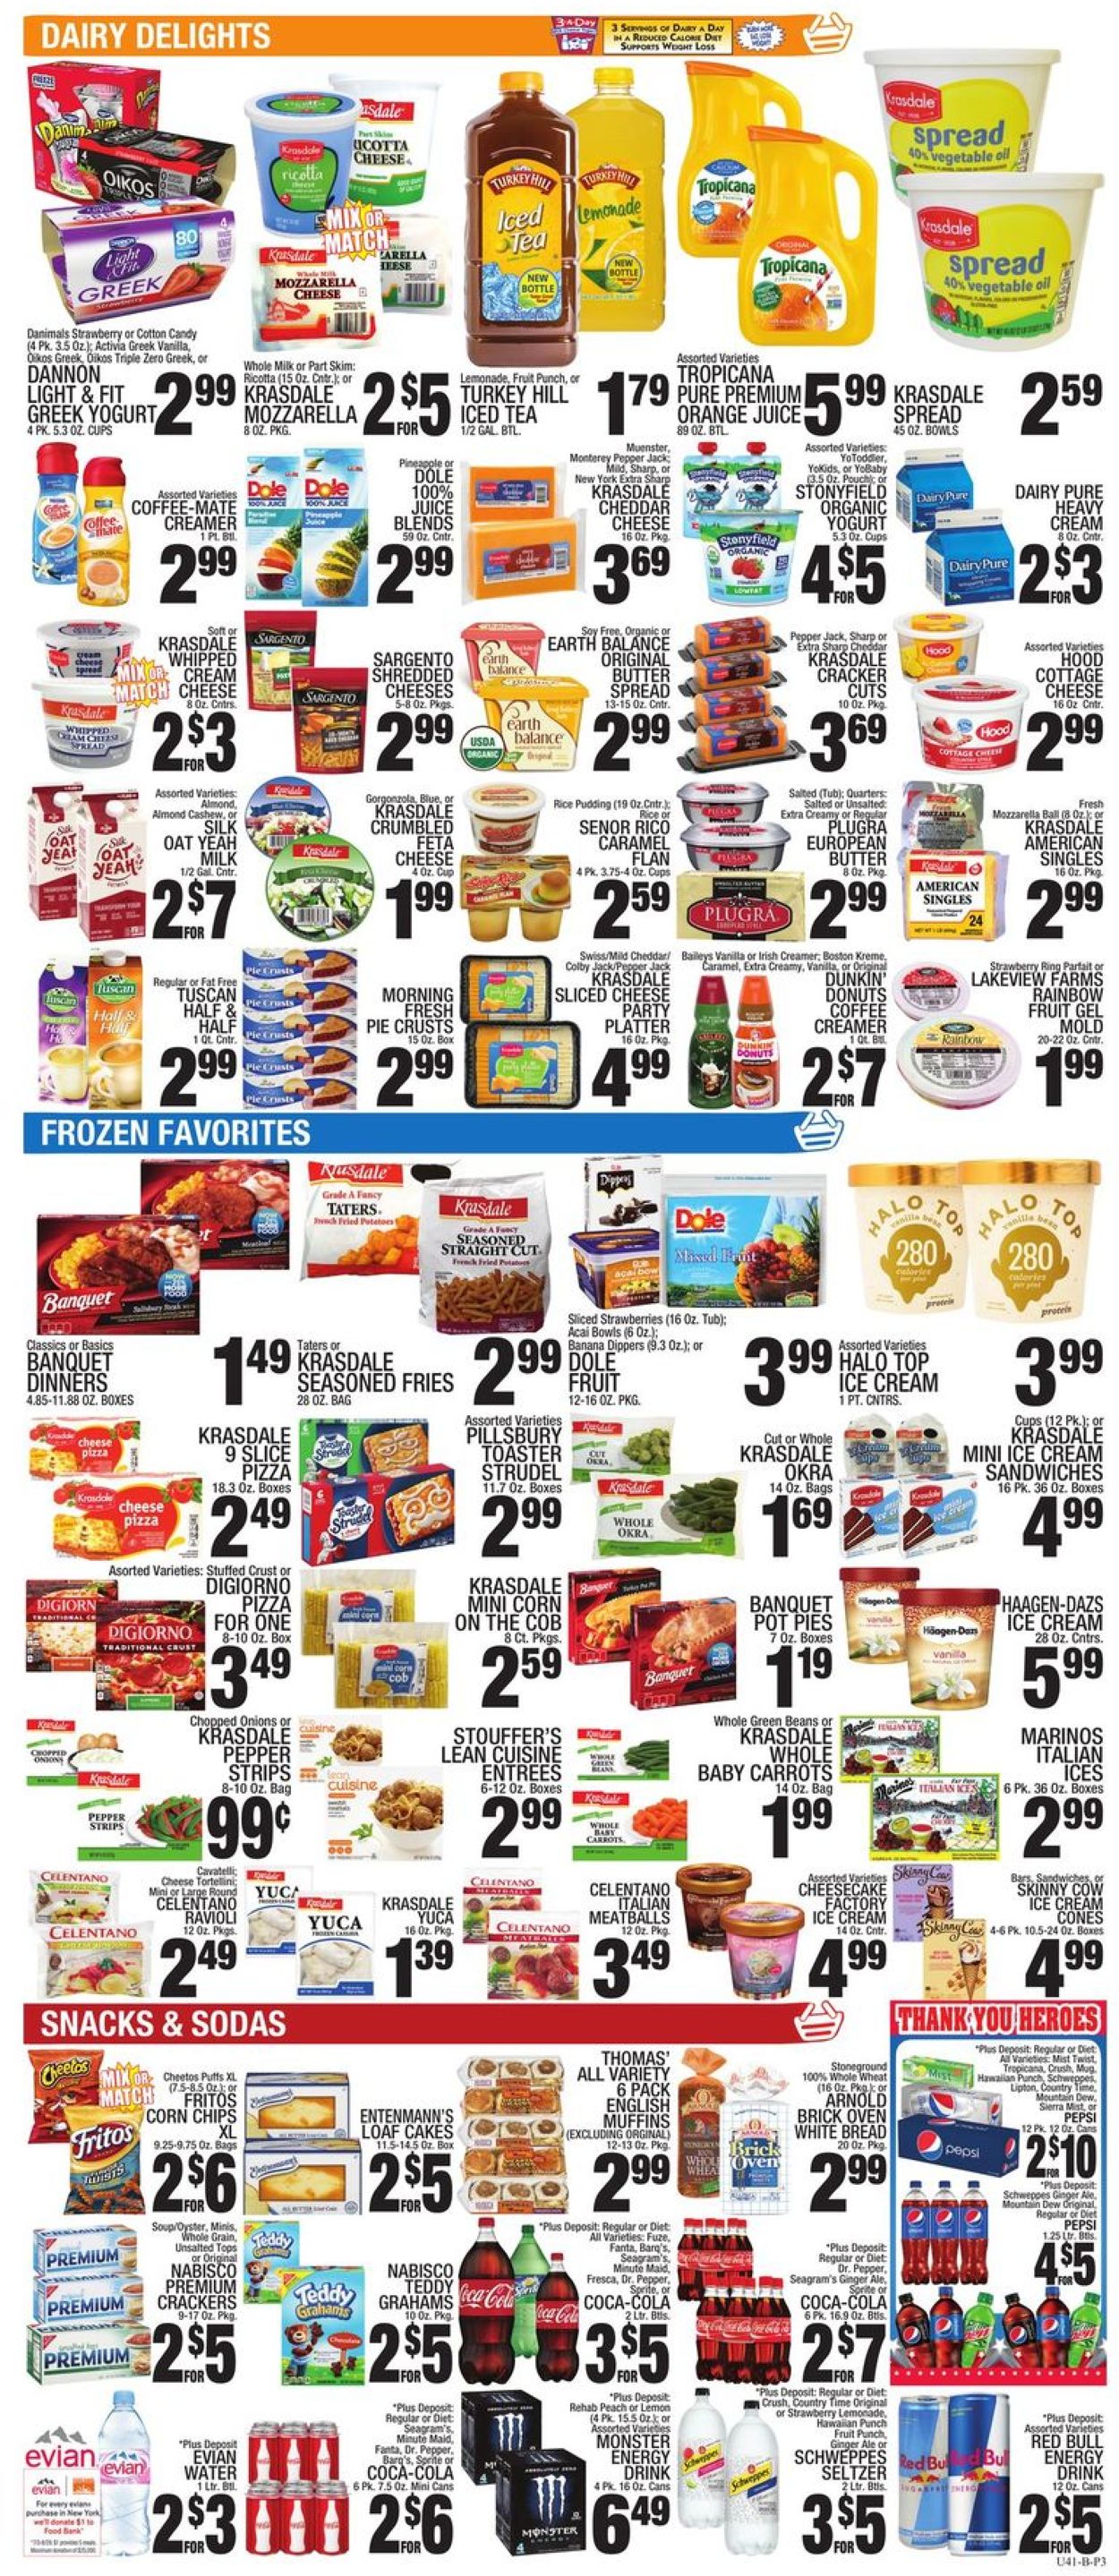 C-Town Current weekly ad 08/07 - 08/13/2020 [3] - frequent-ads.com